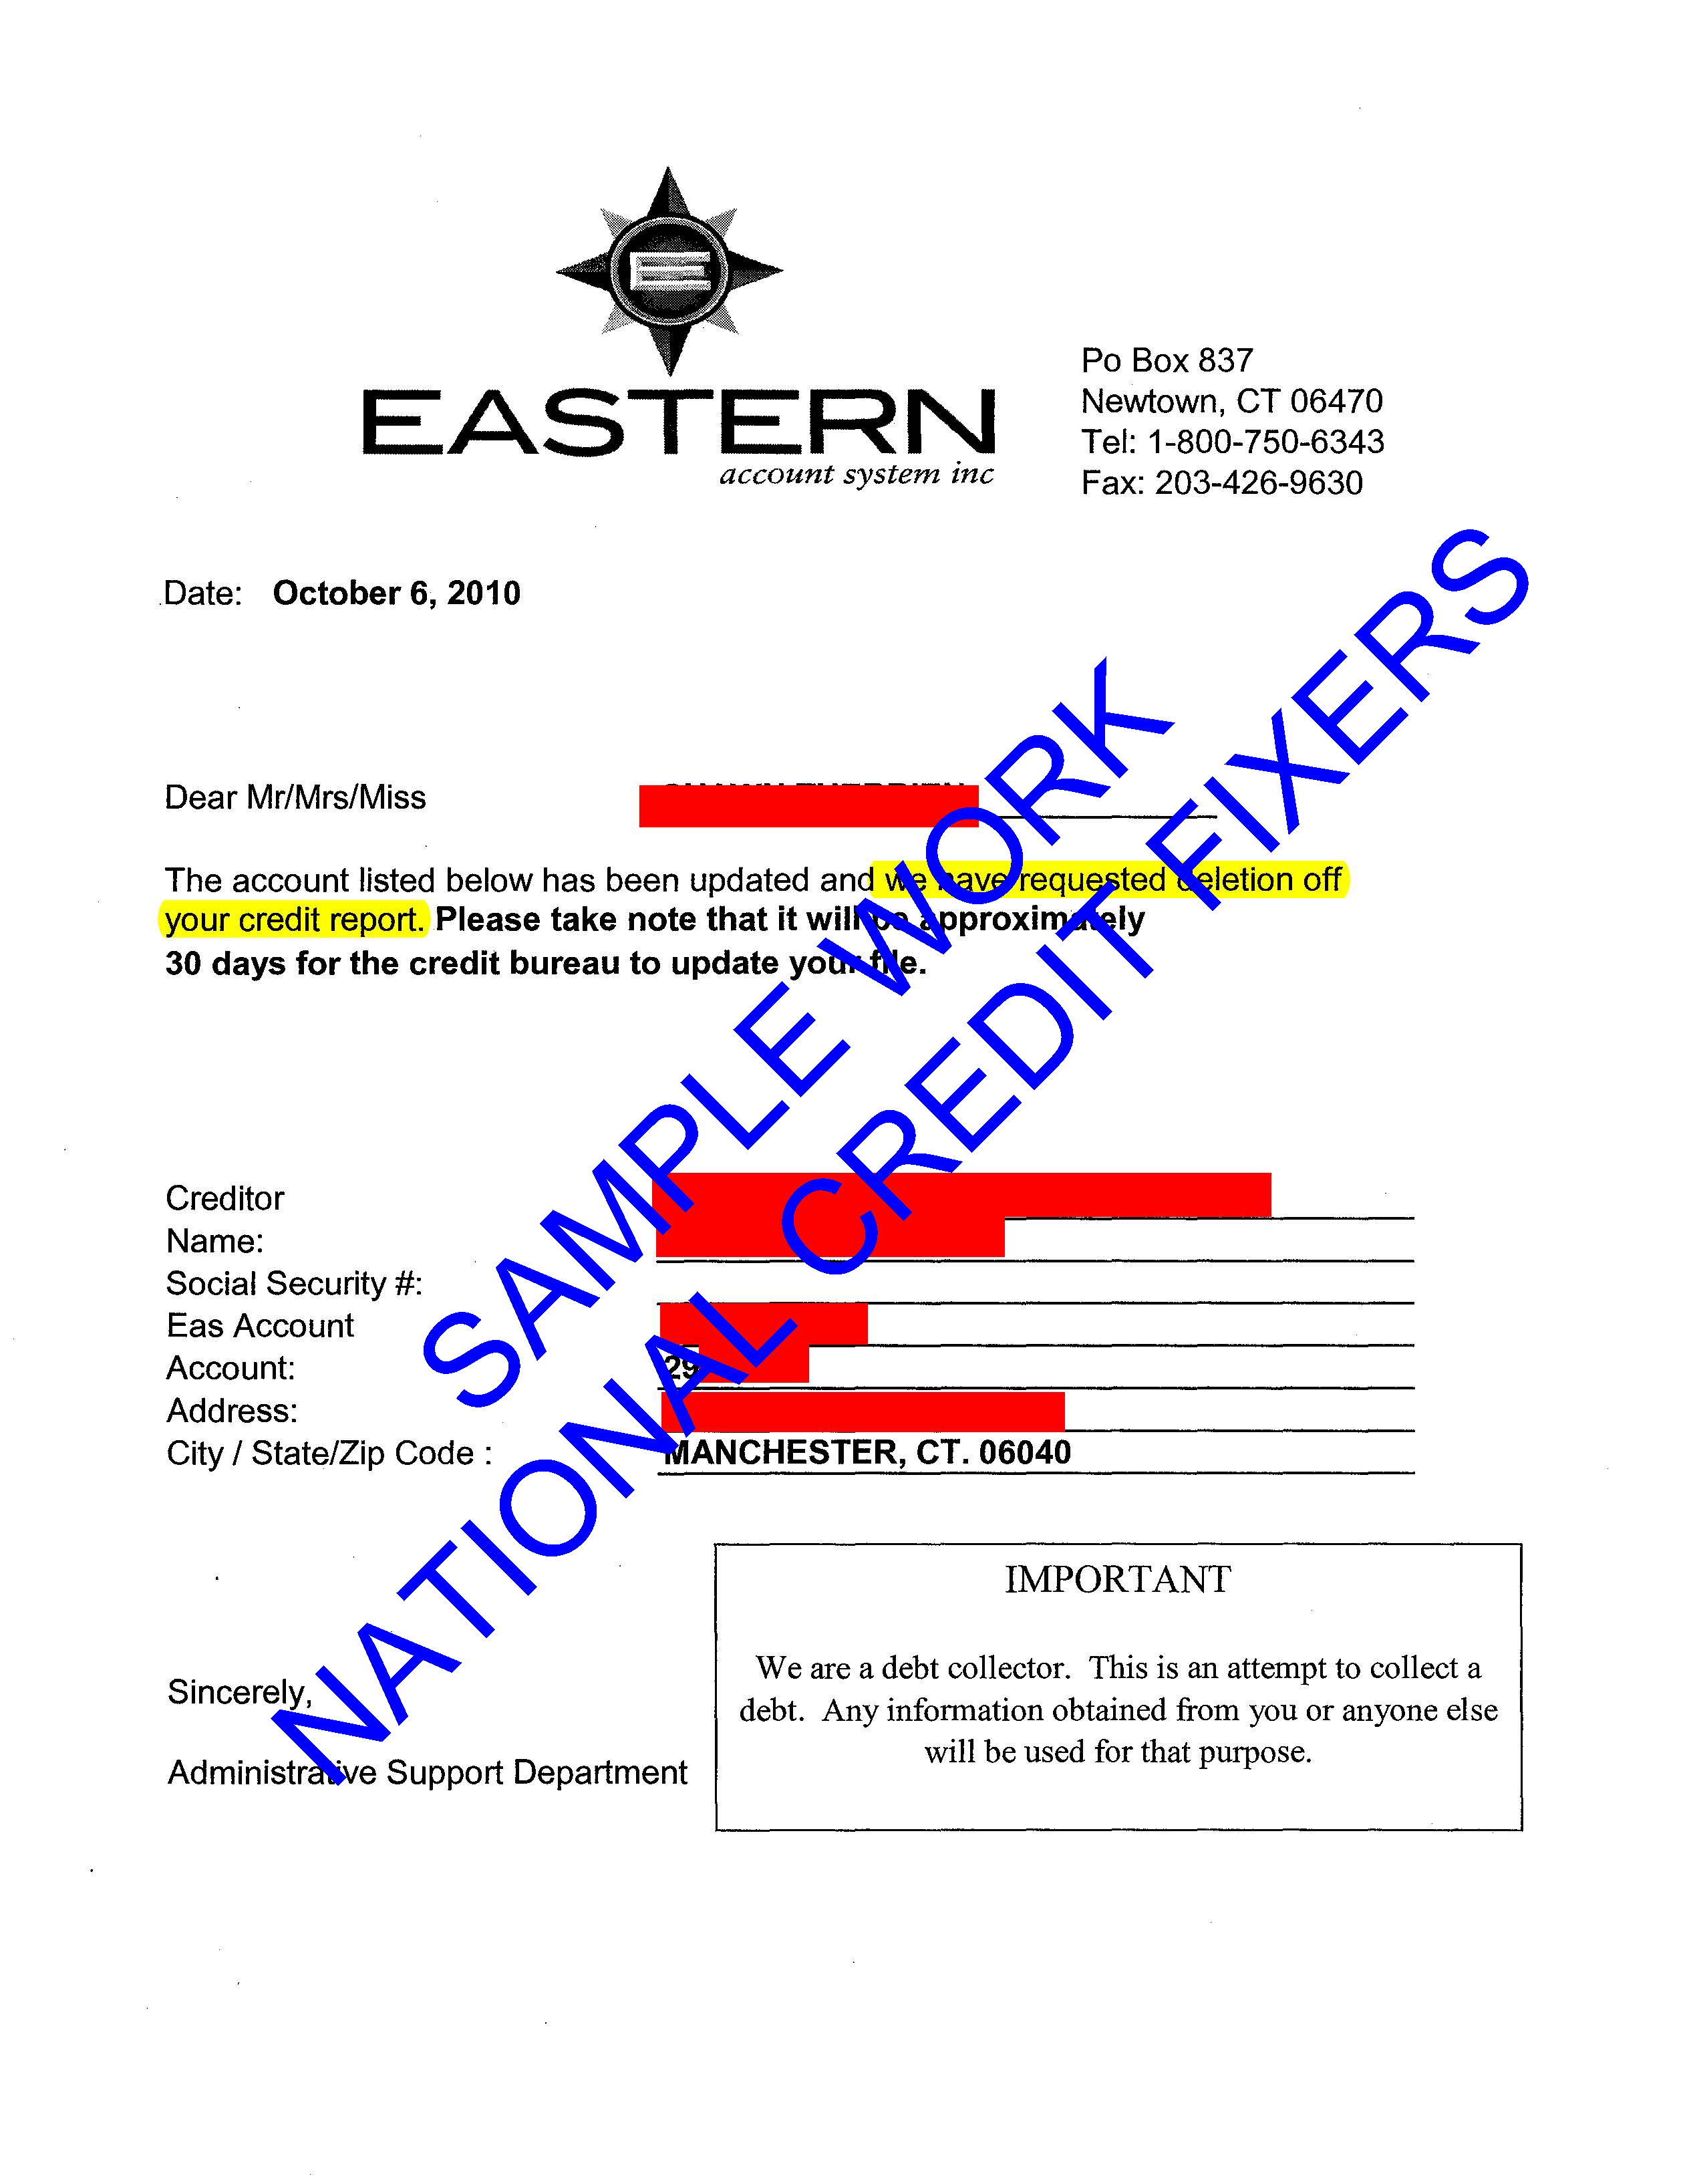 Eastern Account Systems Deletion 2